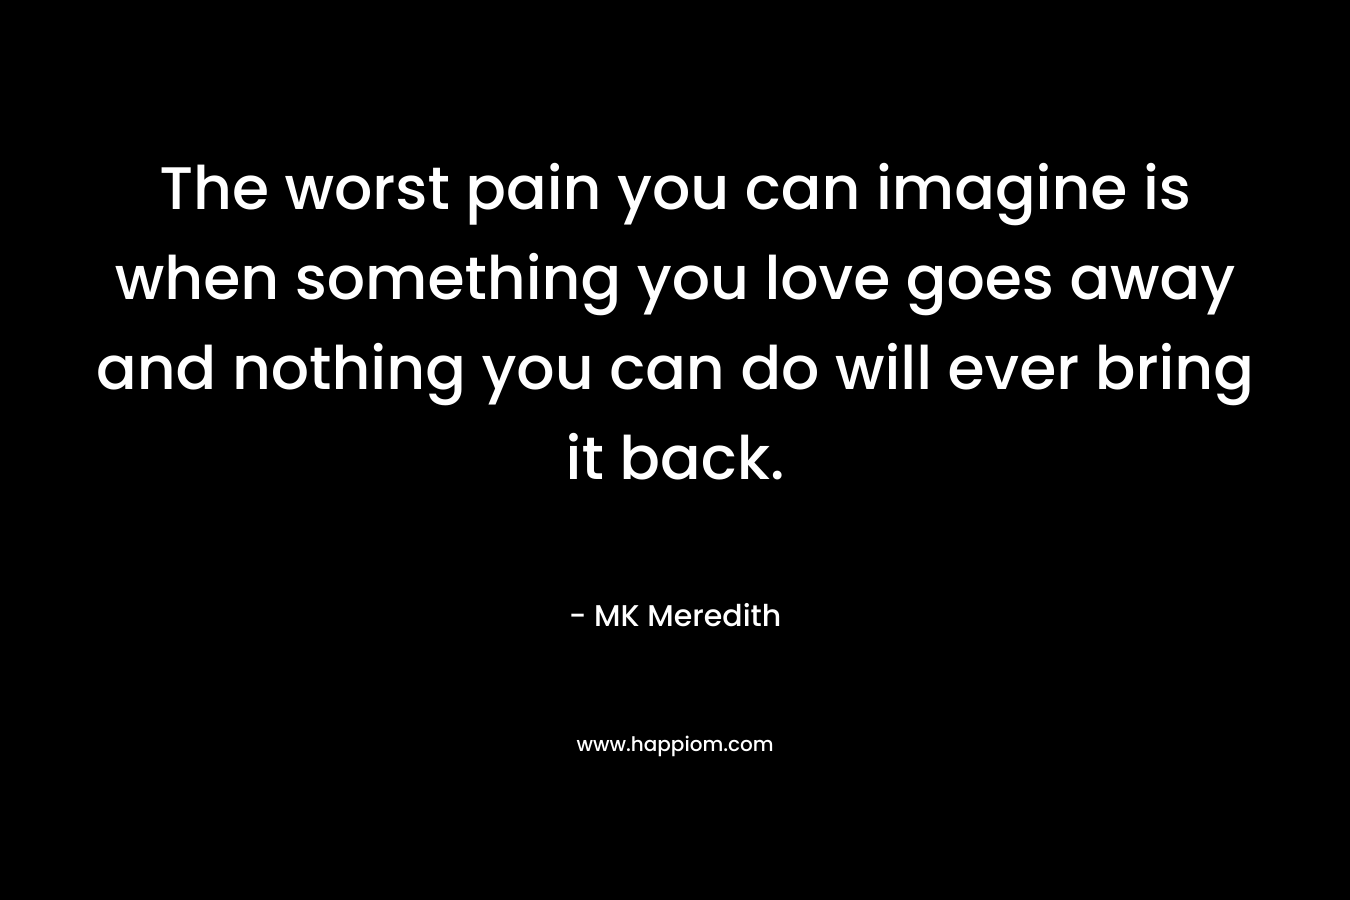 The worst pain you can imagine is when something you love goes away and nothing you can do will ever bring it back.